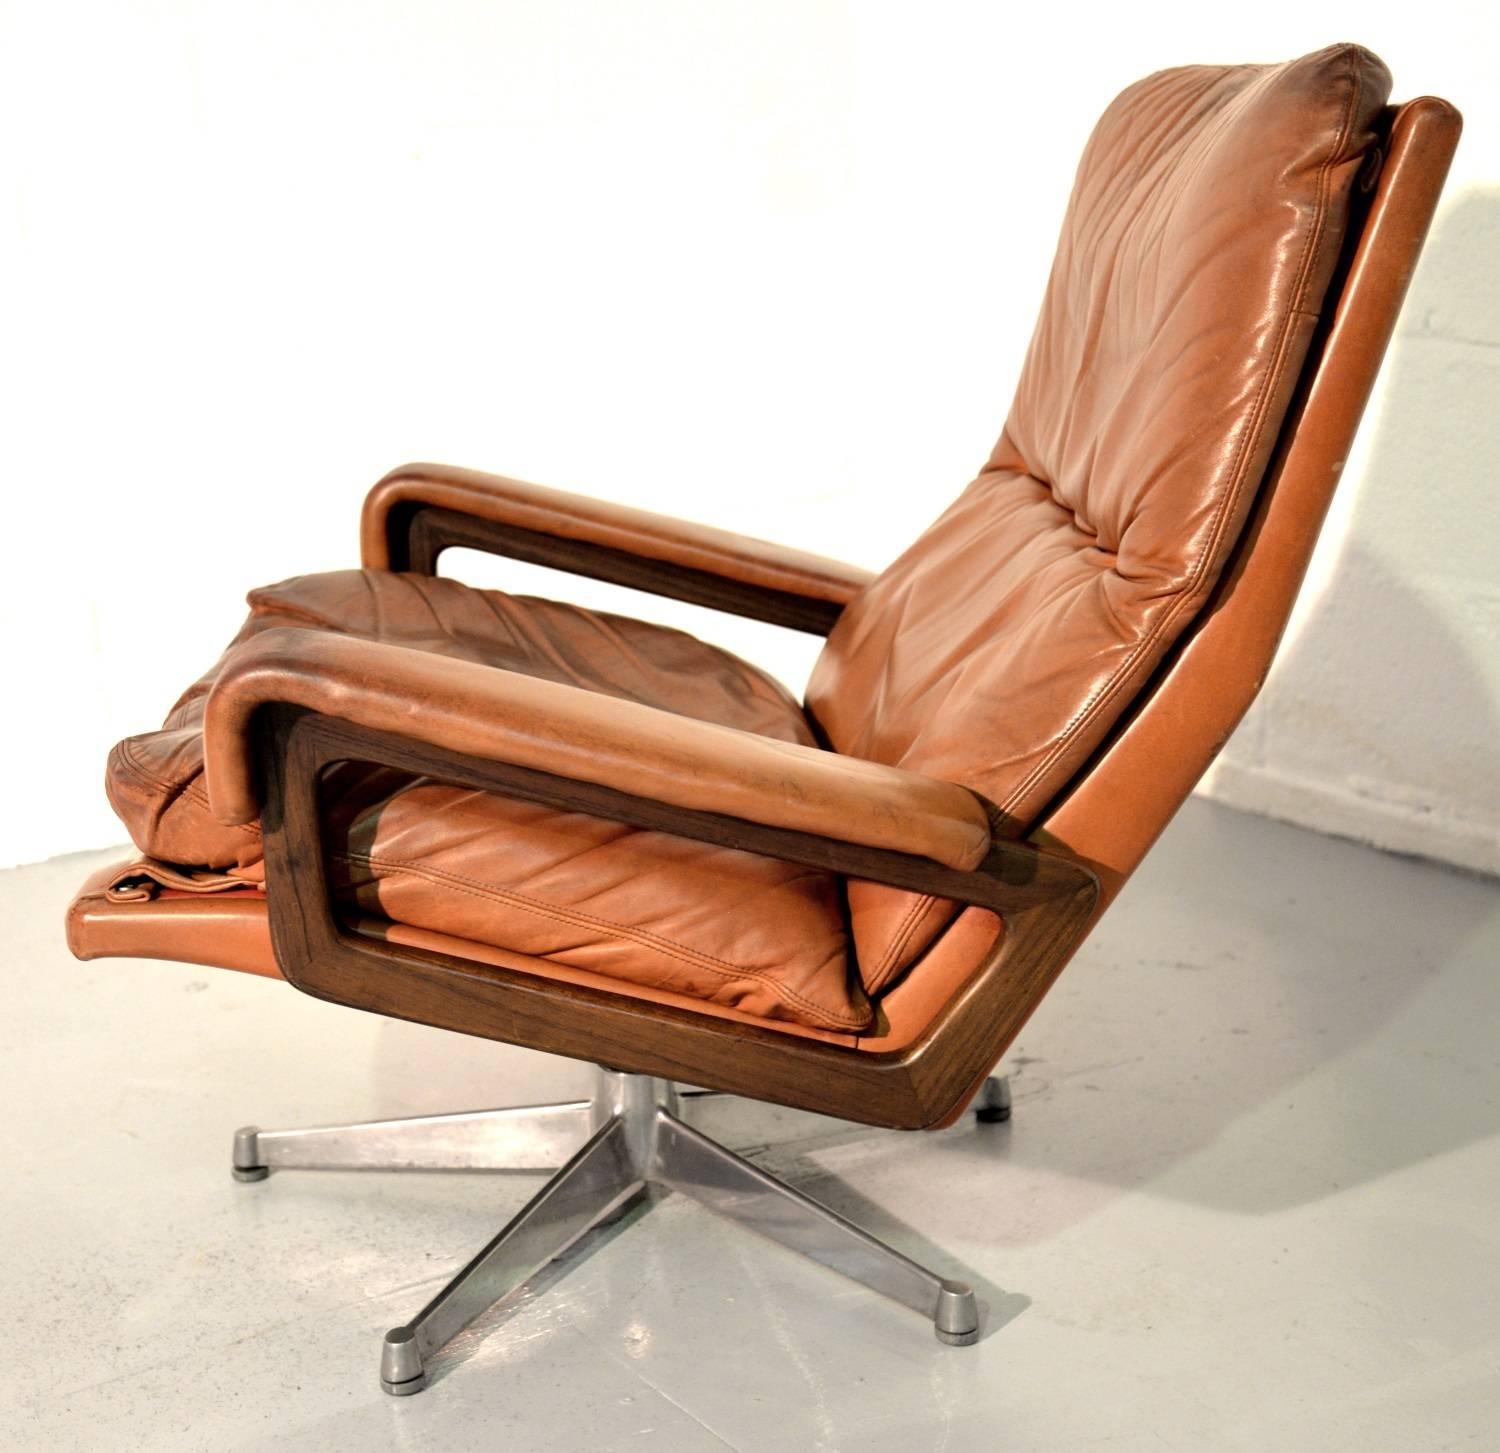 Discounted airfreight for our US and International customers ( from 2 weeks door to door)

A vintage lounge King armchair by Strassle of Switzerland. Designed by Andre Vandenbeuck of Belgium, the swivel lounge armchair is upholstered in stunning tan